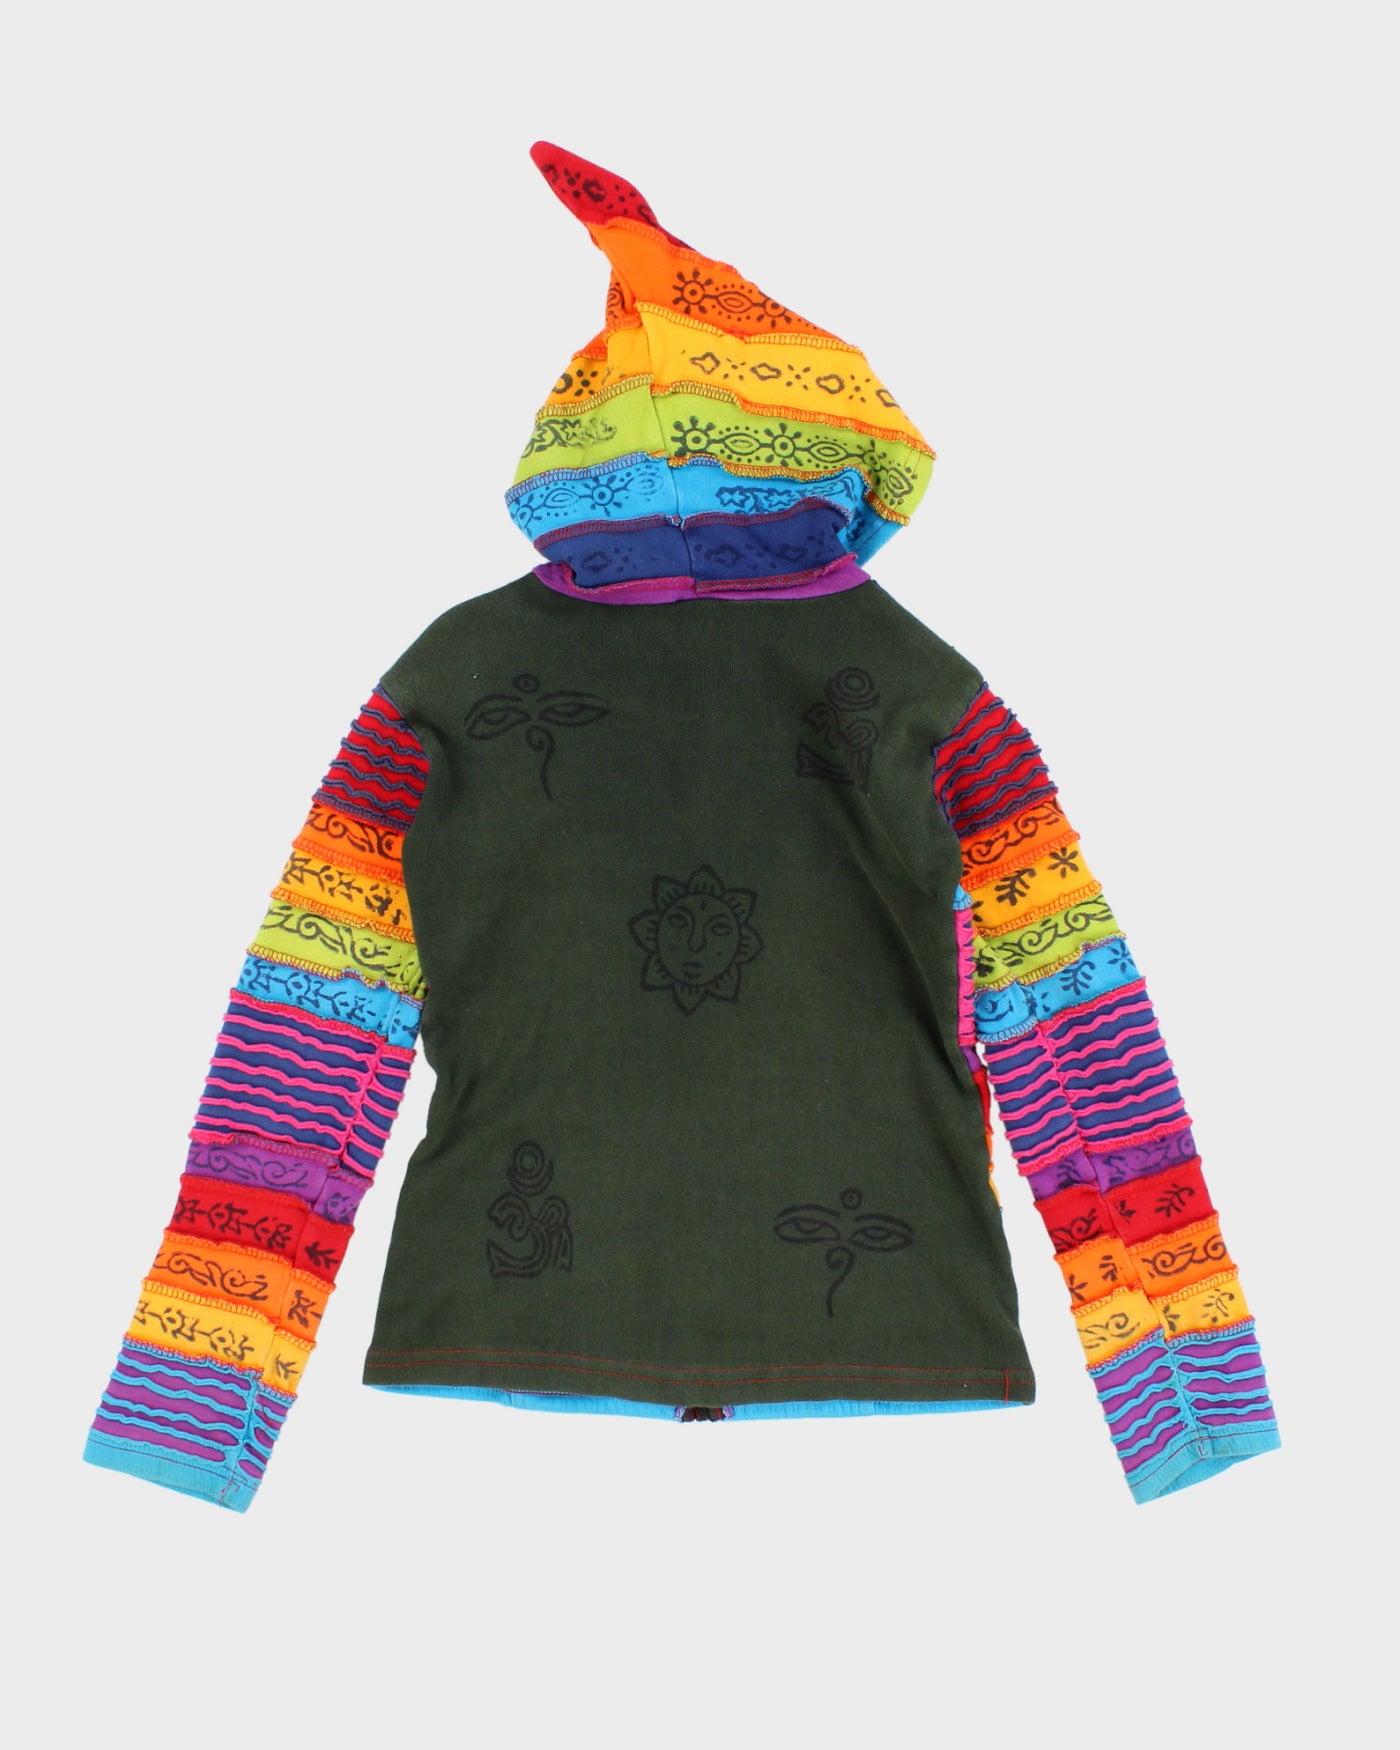 Childrens Layered Patterned Zip-Up Hoodie